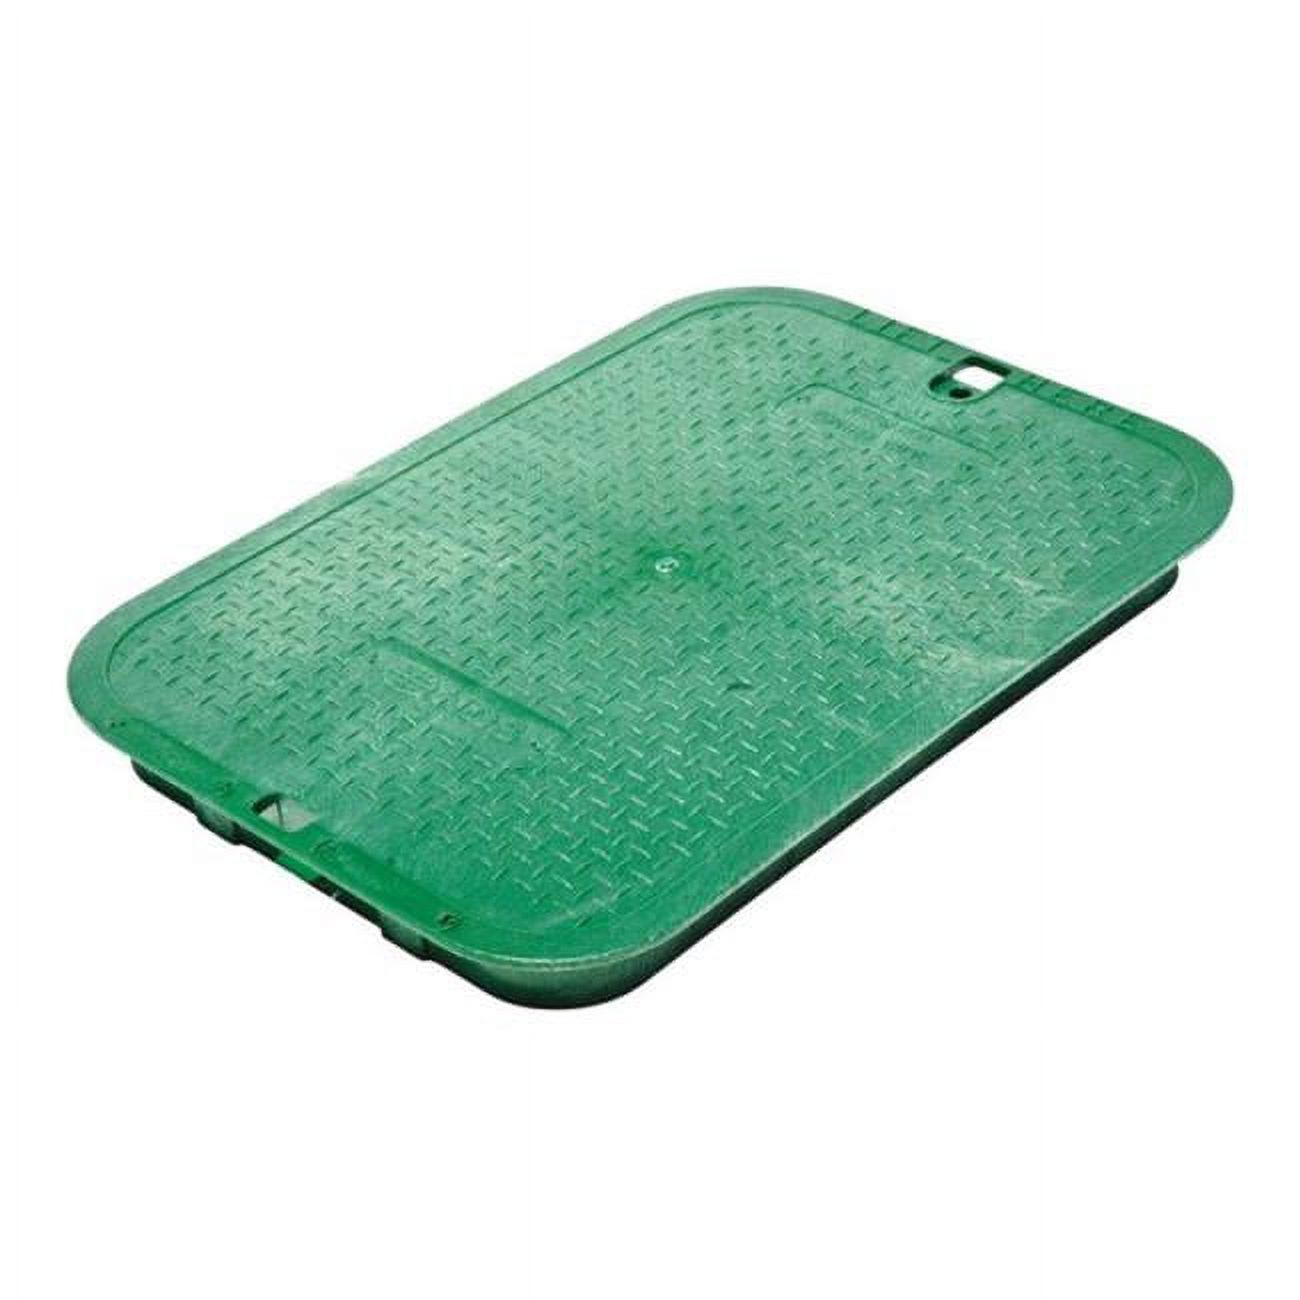 NDS 11-5/8 in. W X 2 in. H Rectangular Valve Box Cover Green - image 1 of 2